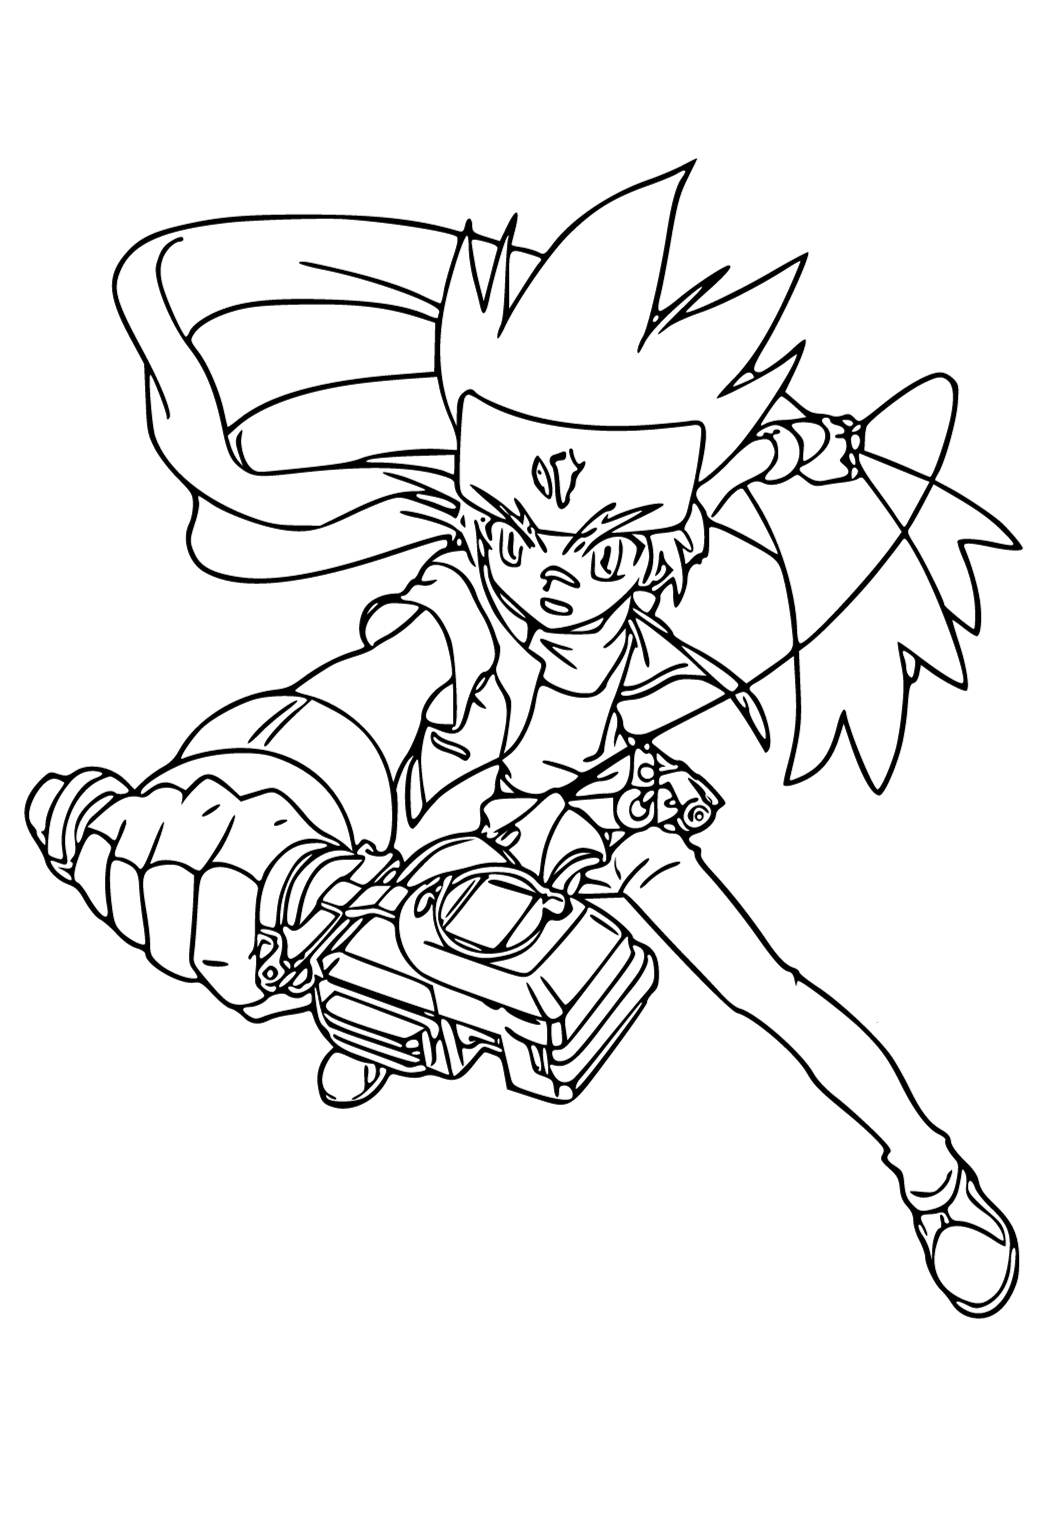 Free Printable Beyblade Attack Coloring Page for Adults and Kids ...